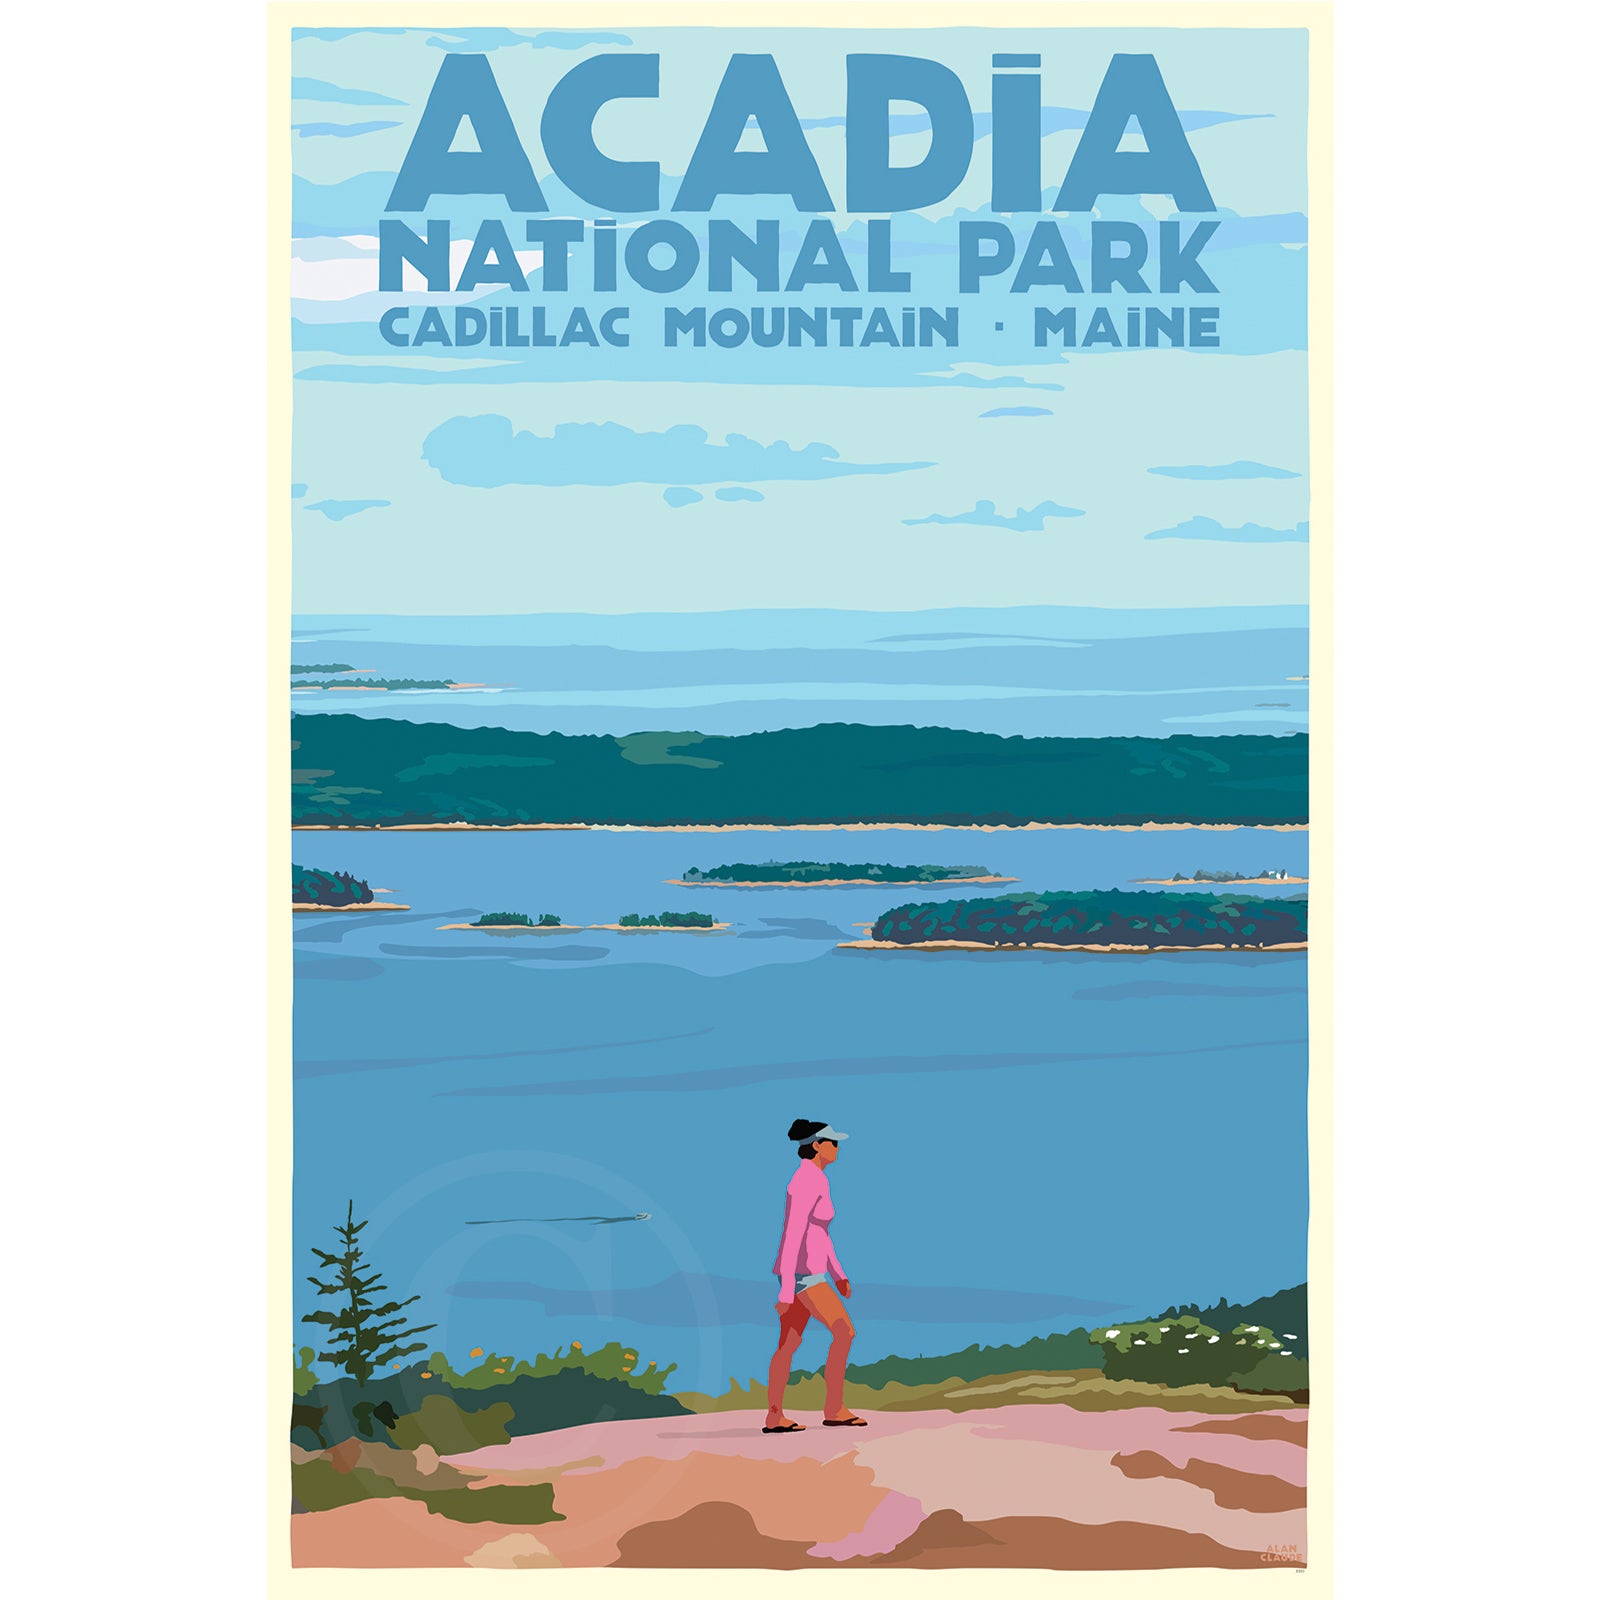 Bec's Walk on Cadillac Mountain Art Print 24" x 36" Travel Poster By Alan Claude - Maine